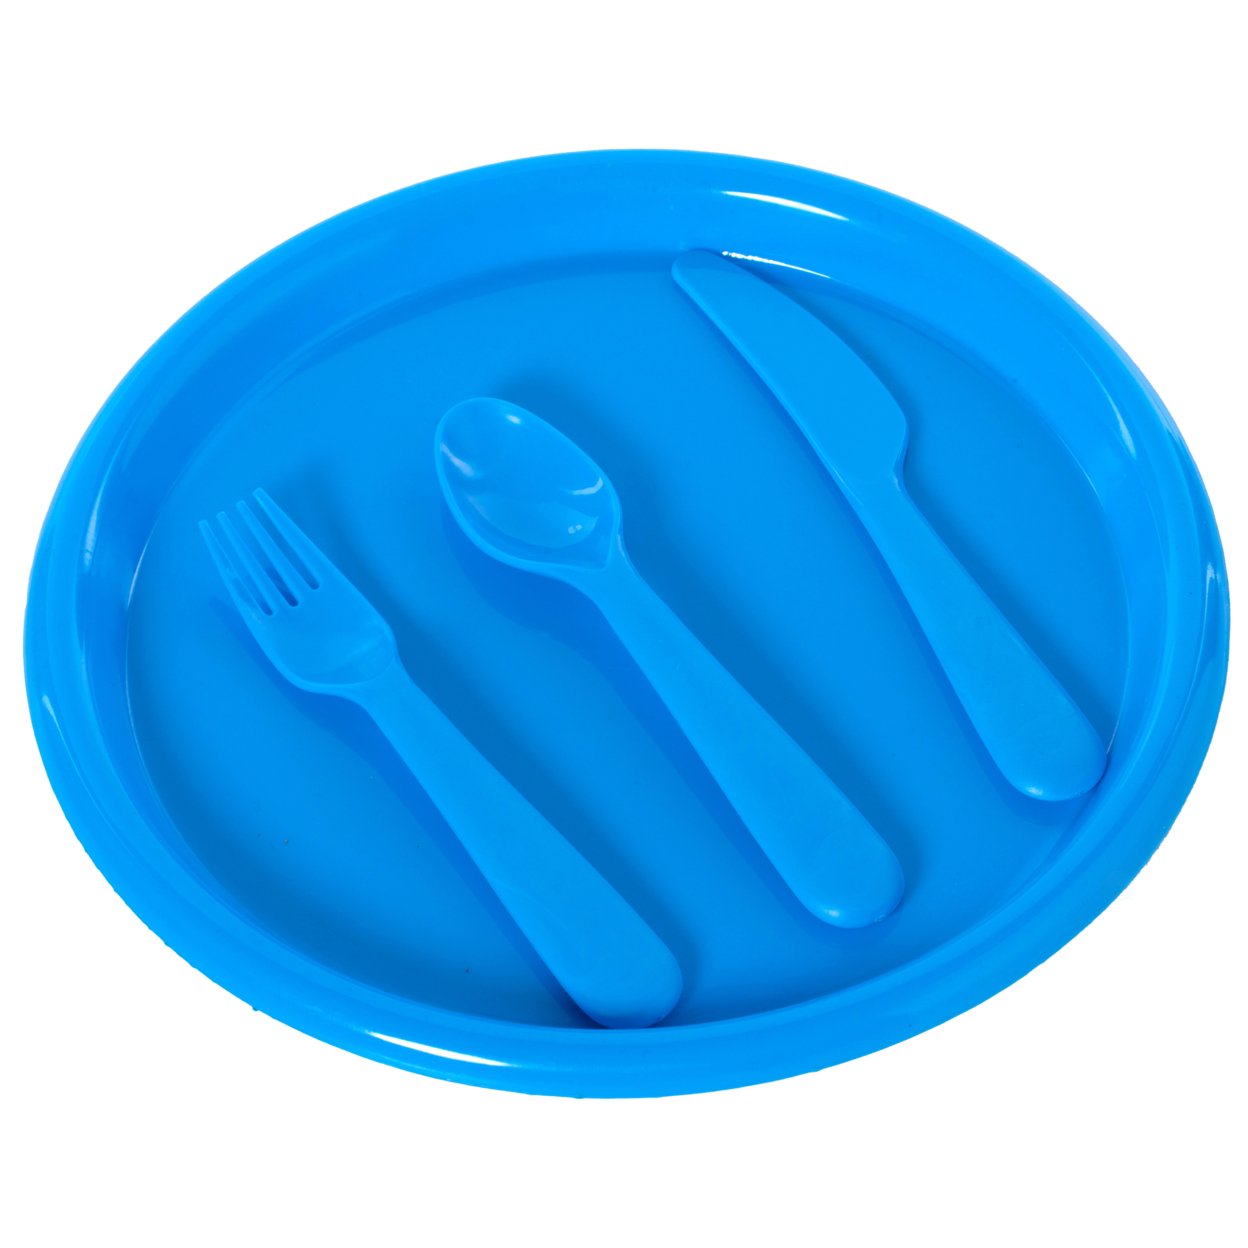 Reusable Cutlery Set Of 4 Plastic Plates, Spoons, Forks And Knives For Baby And Toddlers - Blue